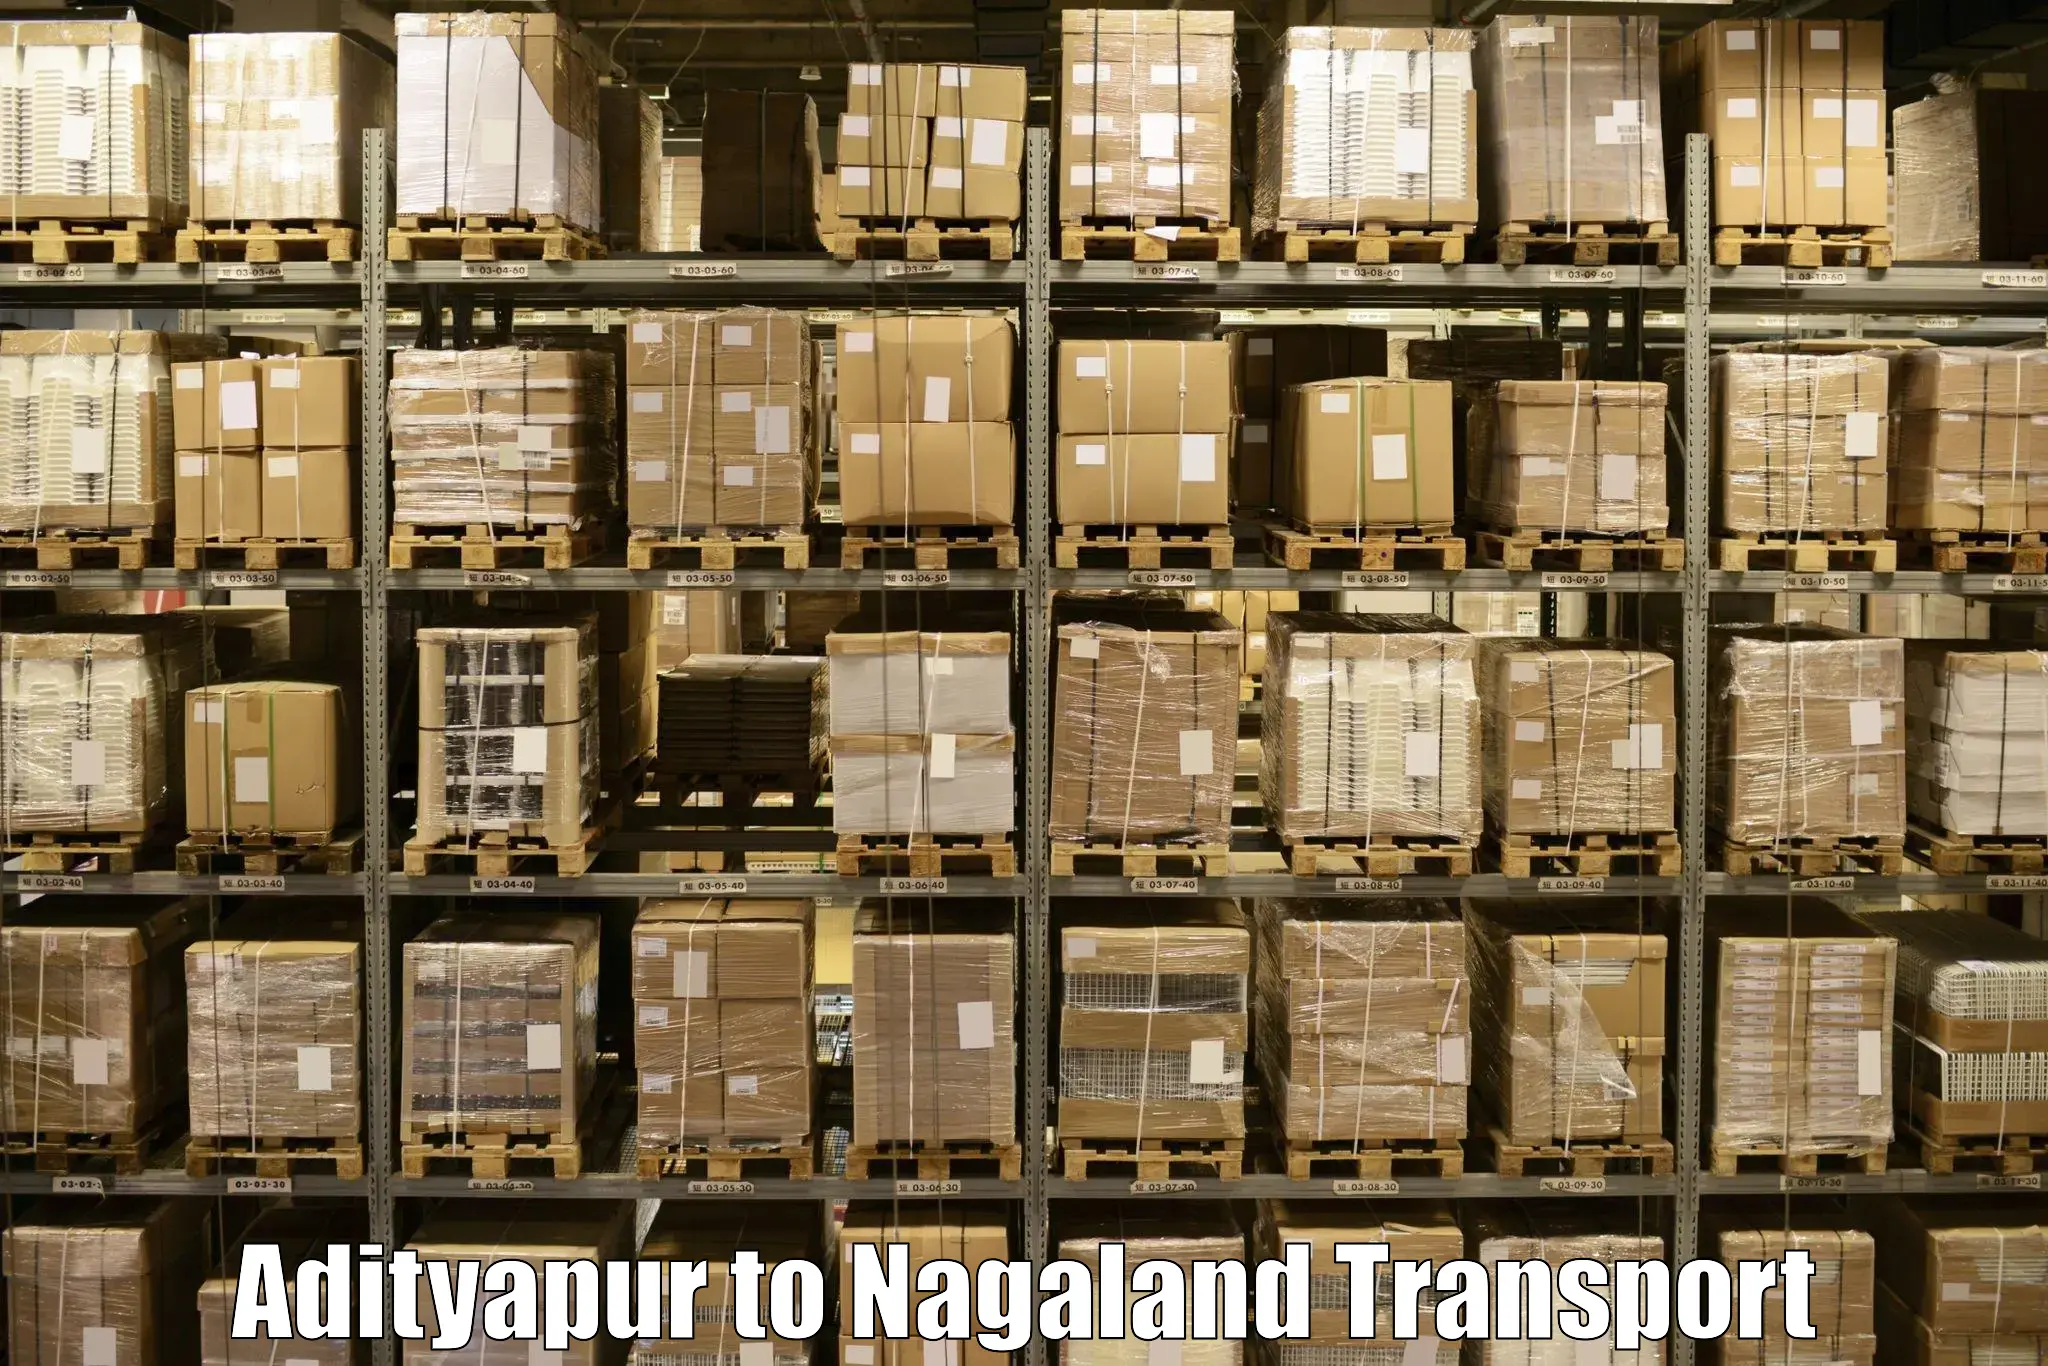 Commercial transport service Adityapur to Mon